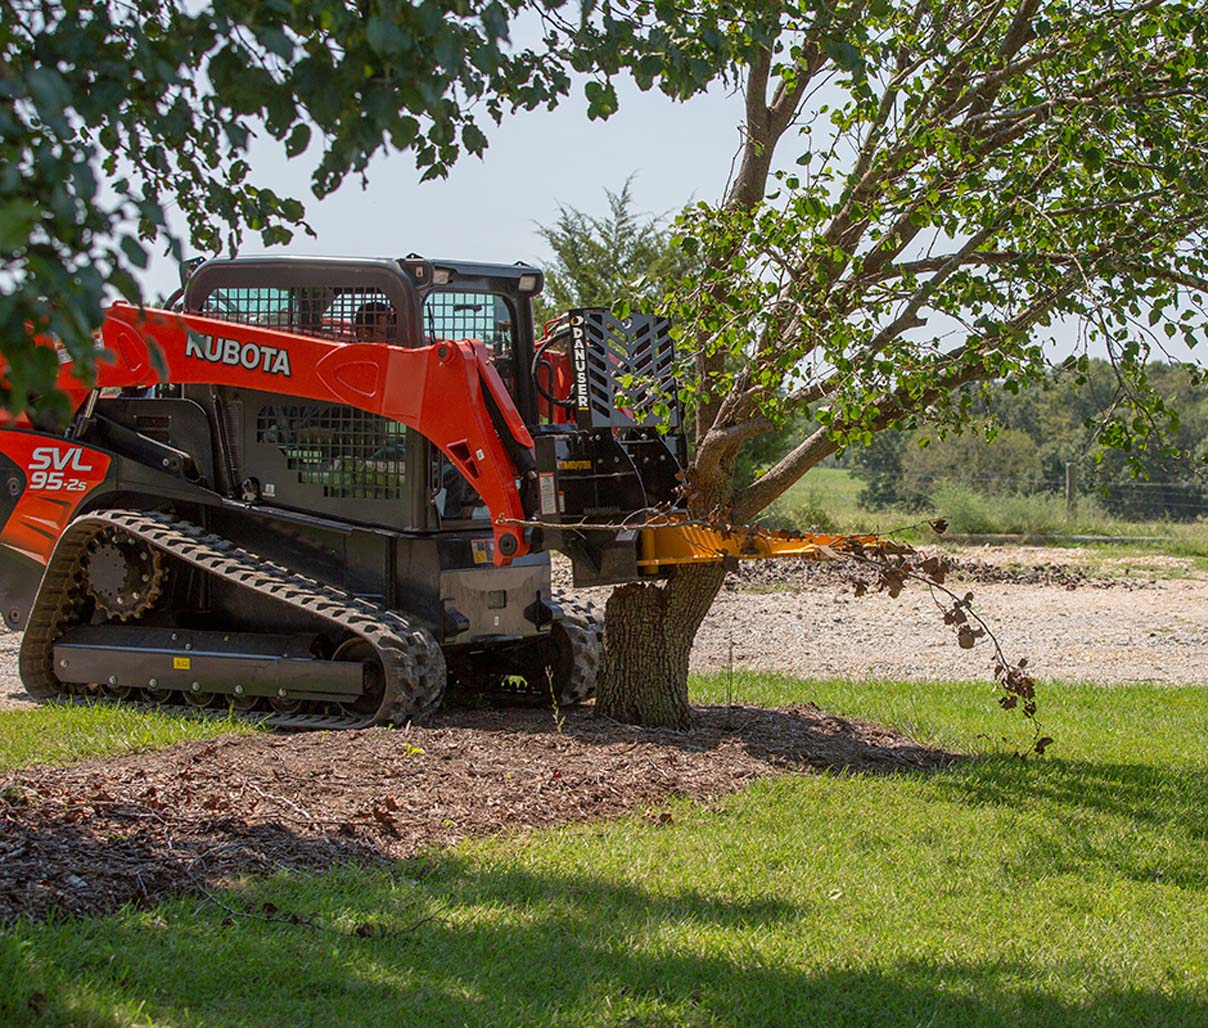 A true land-clearing, obstacle-removing attachment for your skid-steer or tractor